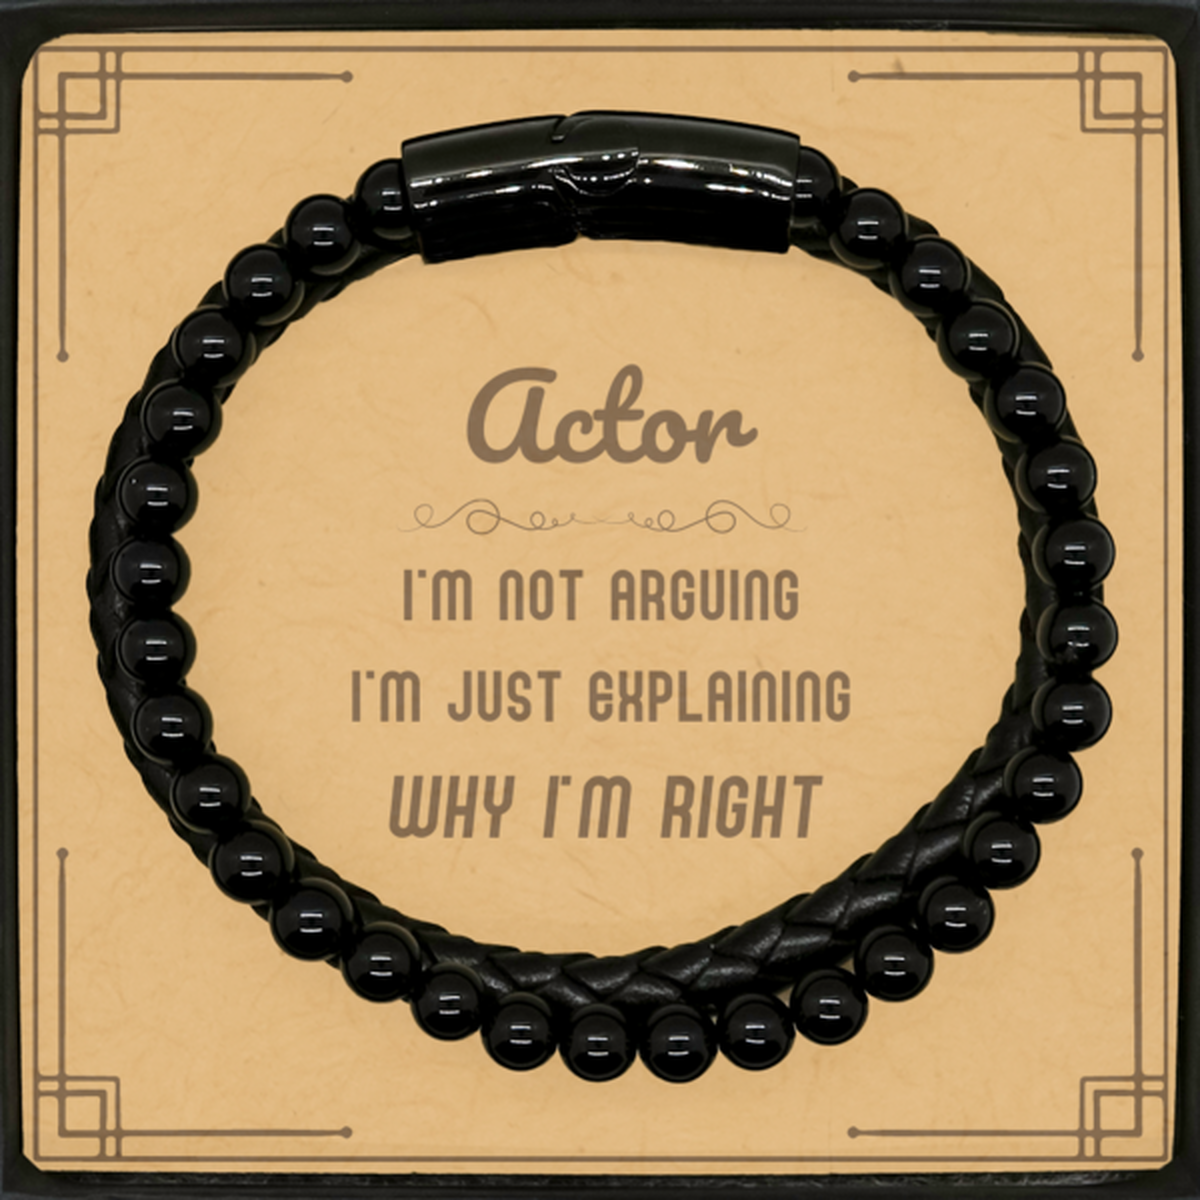 Actor I'm not Arguing. I'm Just Explaining Why I'm RIGHT Stone Leather Bracelets, Funny Saying Quote Actor Gifts For Actor Message Card Graduation Birthday Christmas Gifts for Men Women Coworker